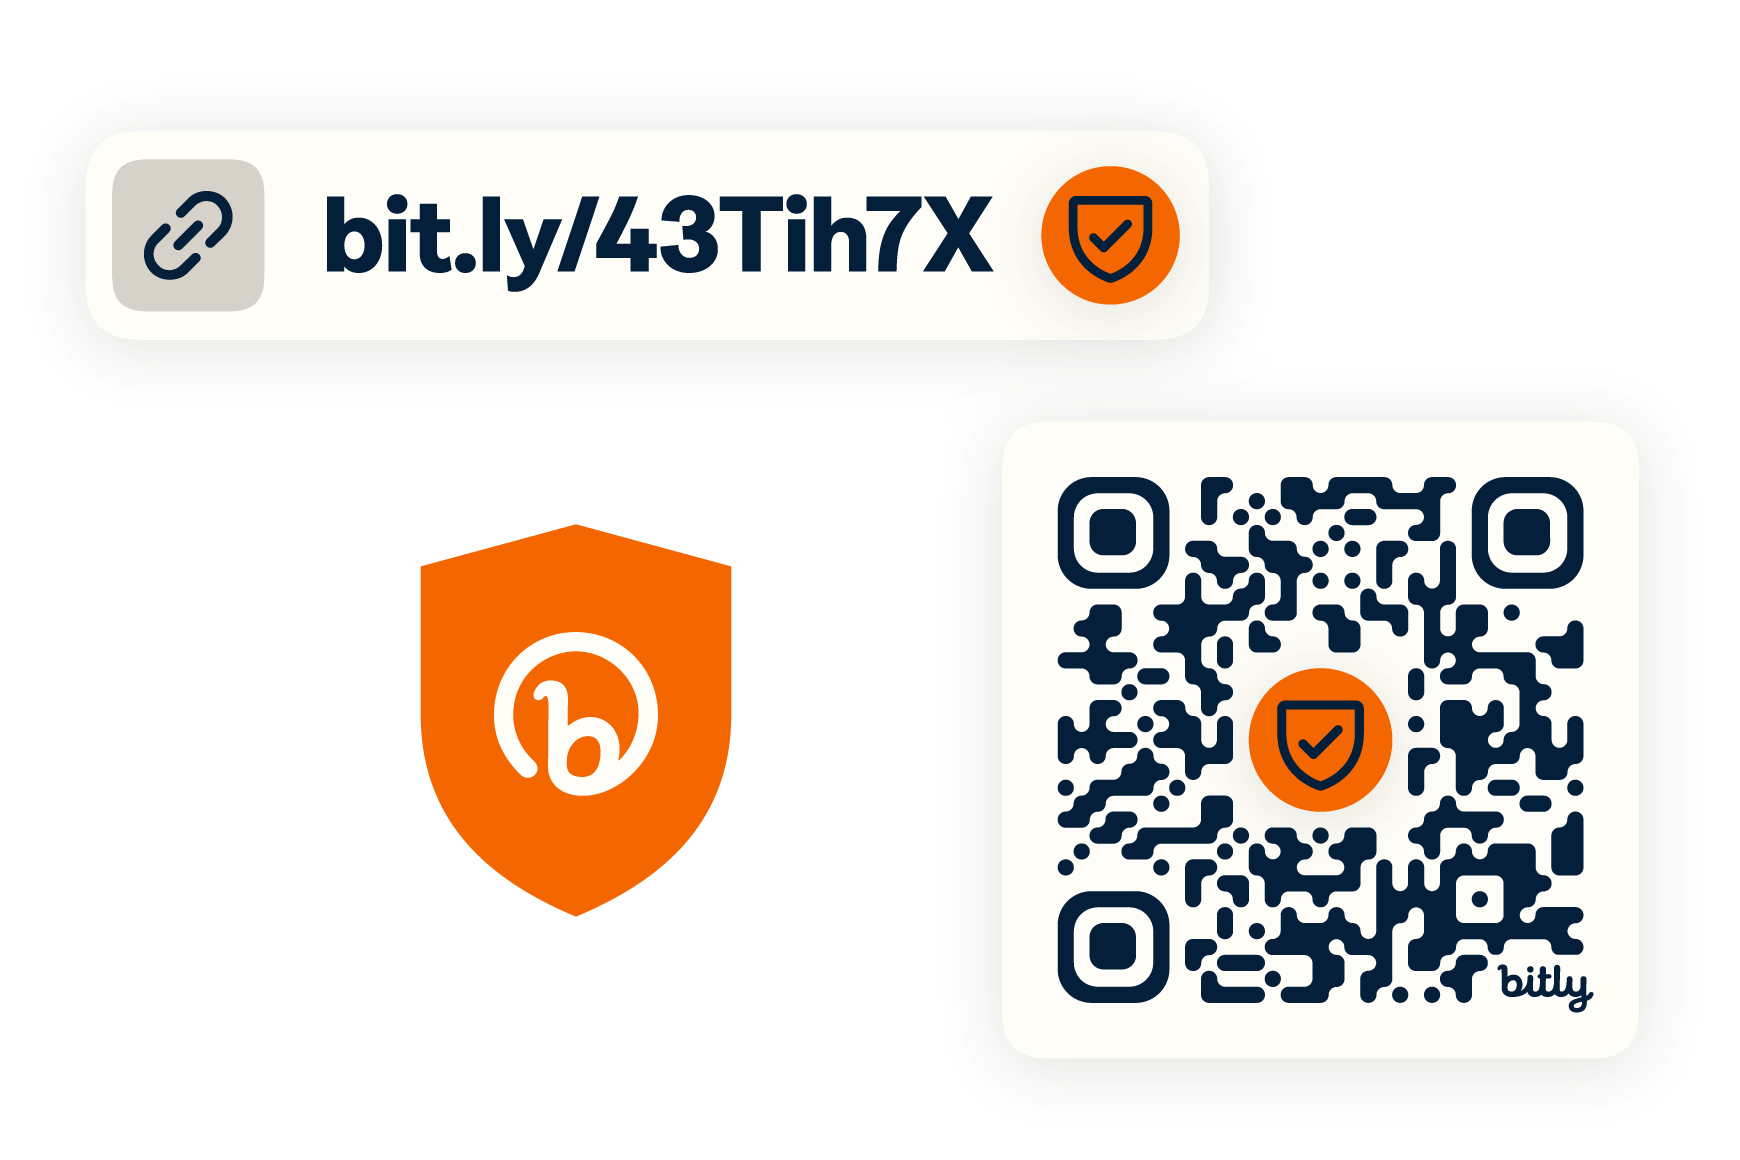 Bitly short link, QR code and trust and safety shield